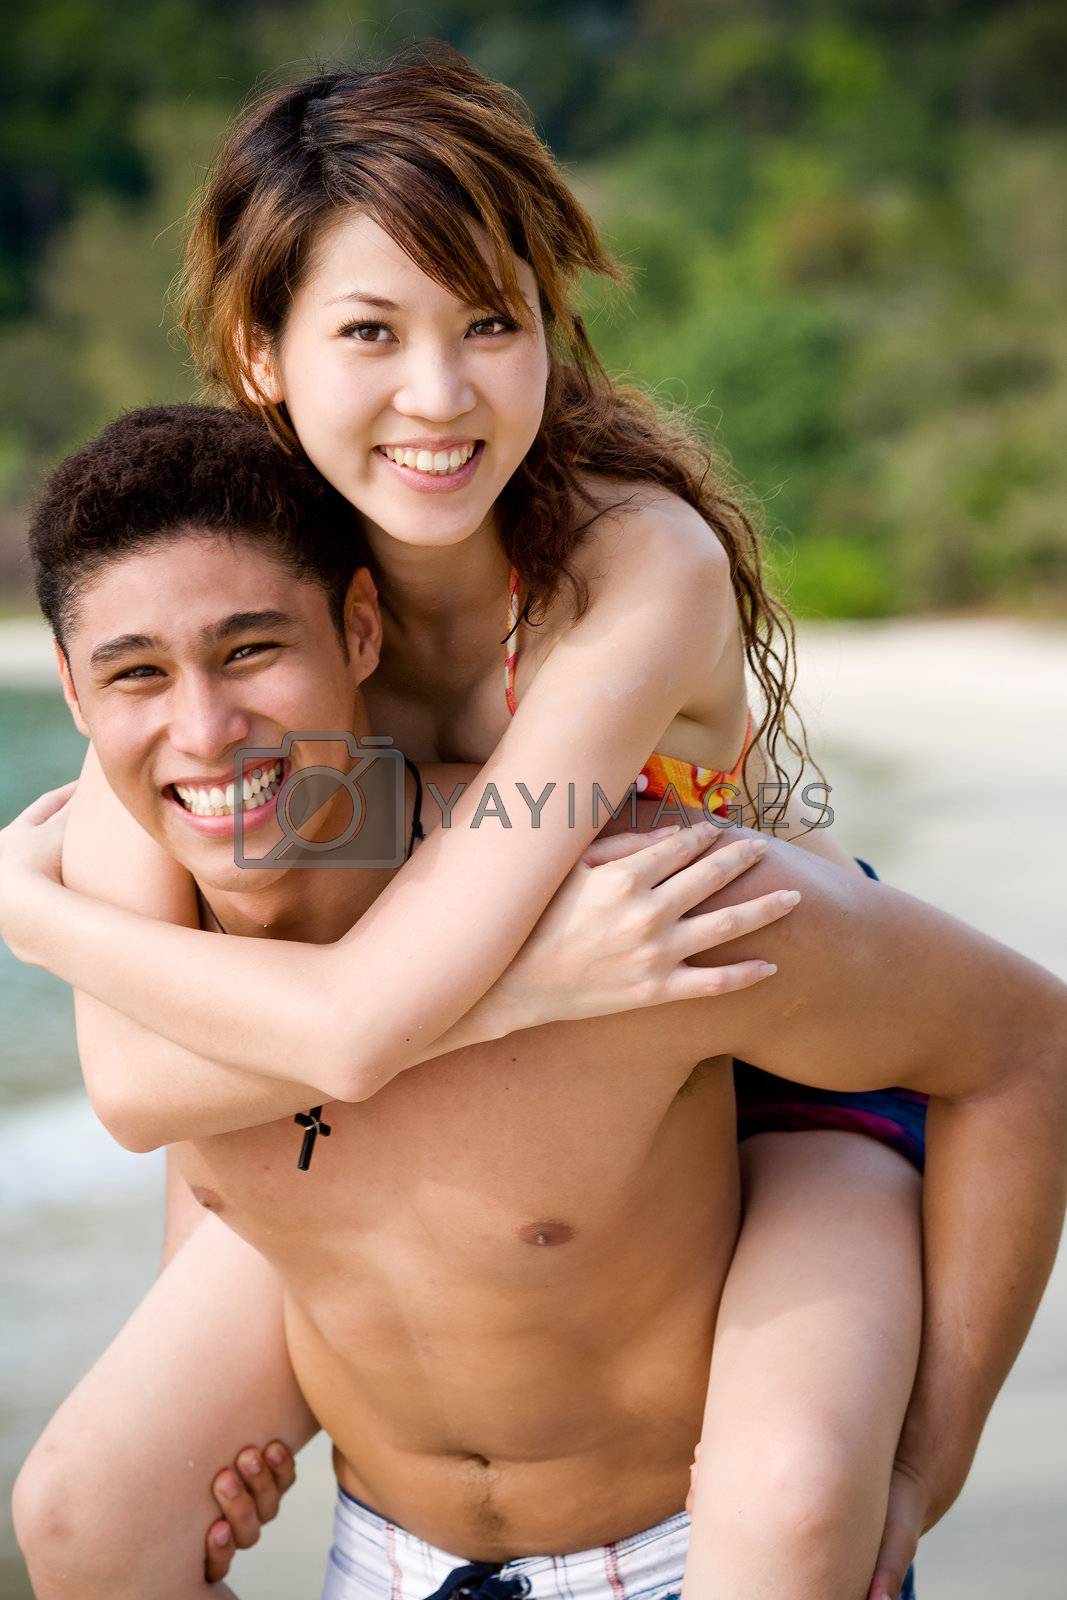 Royalty free image of young couple having fun by eyedear